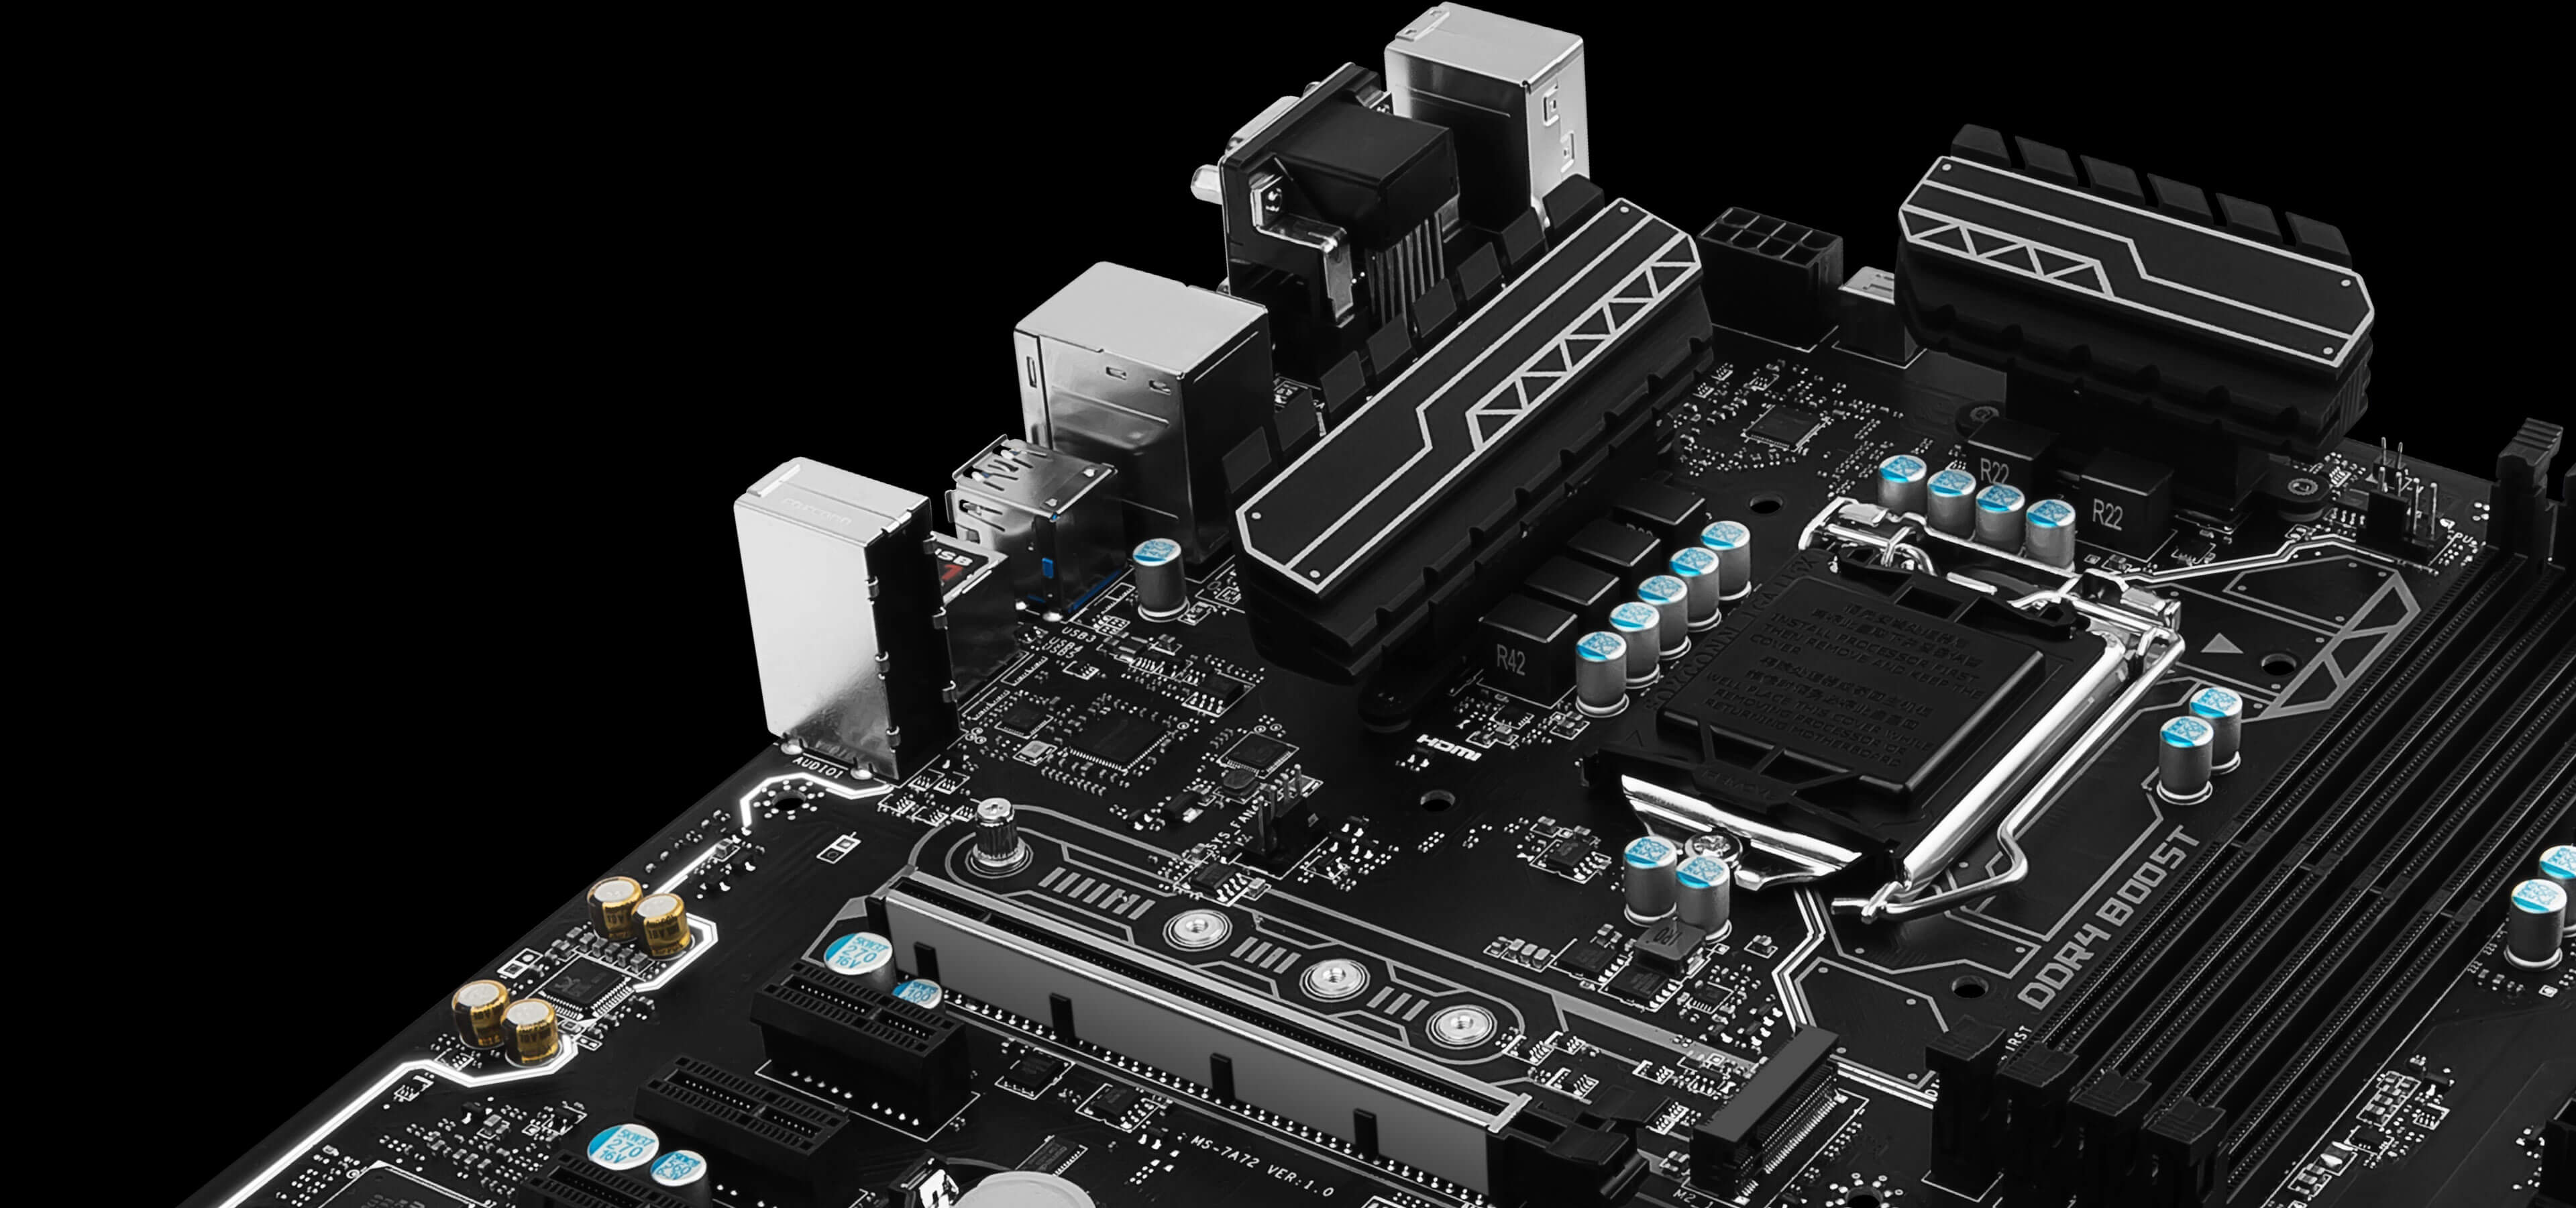 B250 PC MATE | Motherboard - The world leader in motherboard design